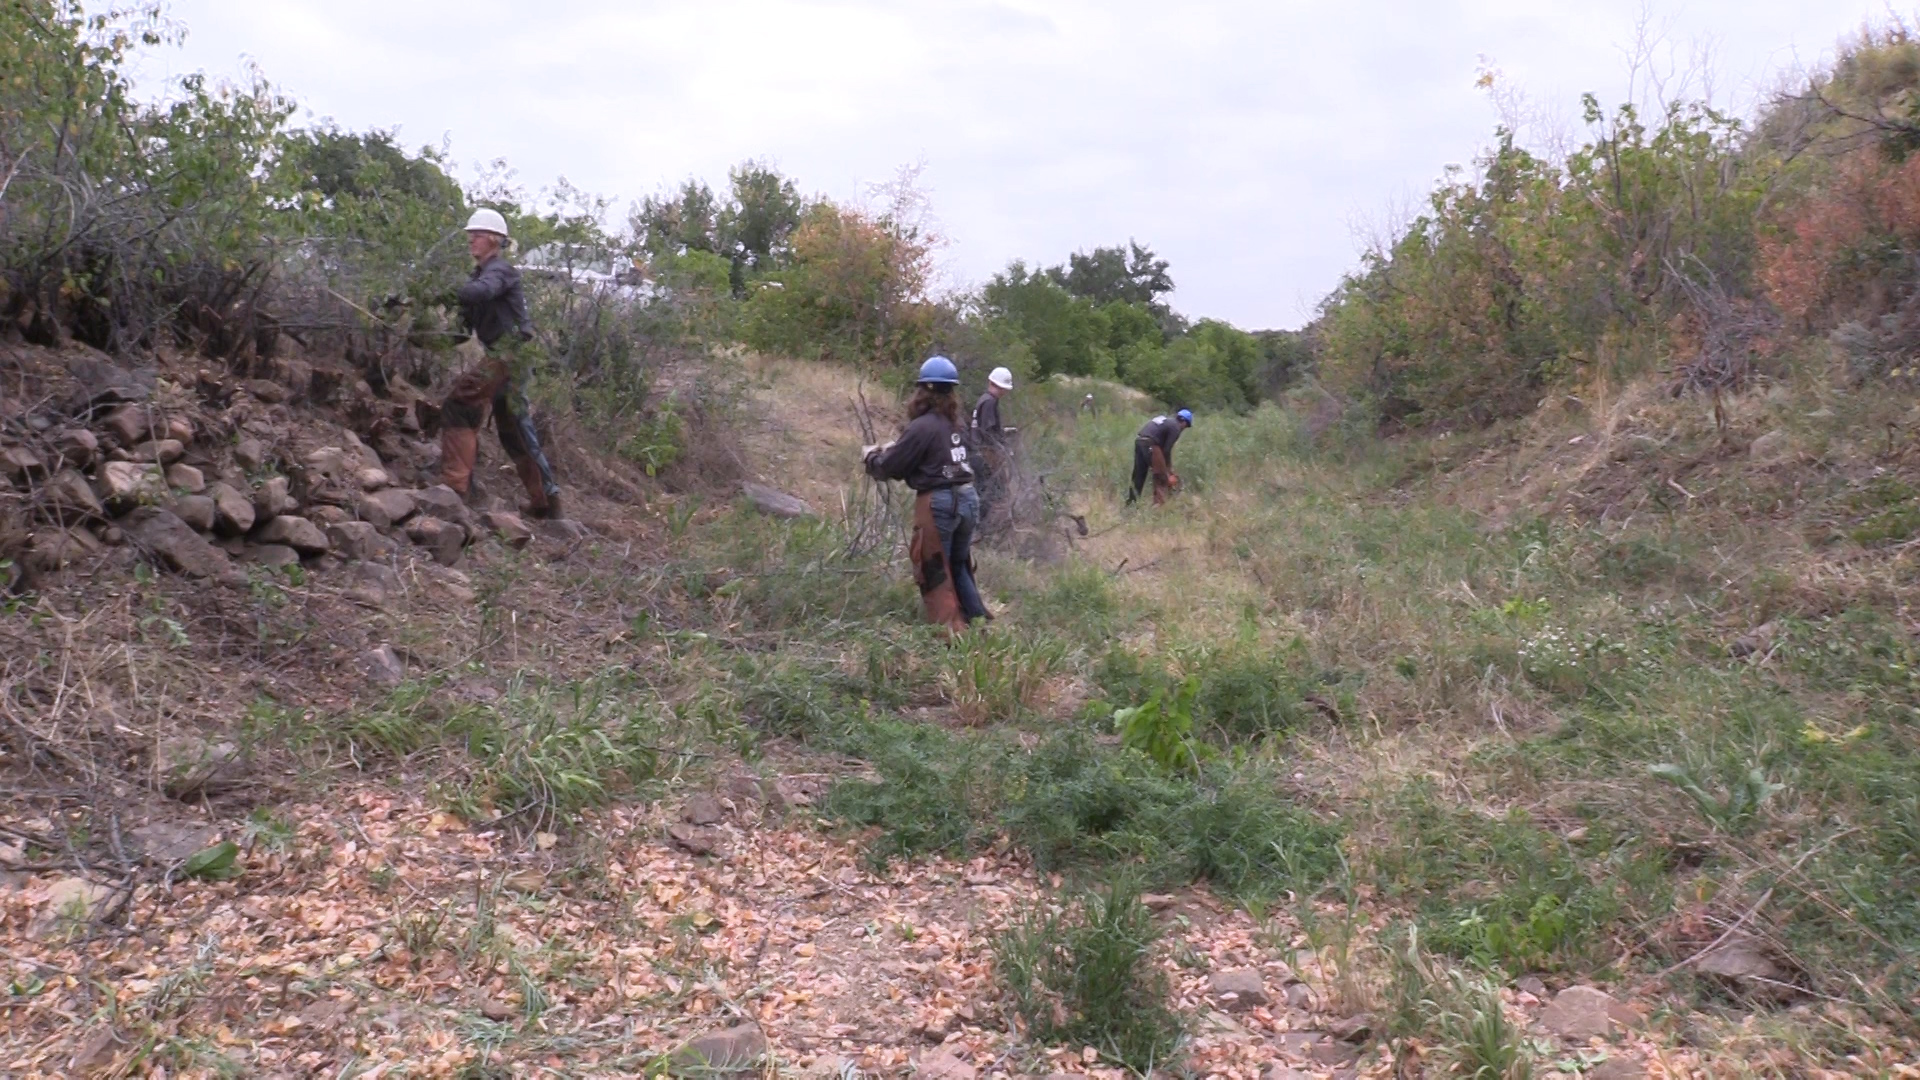 Members of the Mile High Youth Corps remove overgrown vegetation along the High Line Canal in Waterton Canyon.